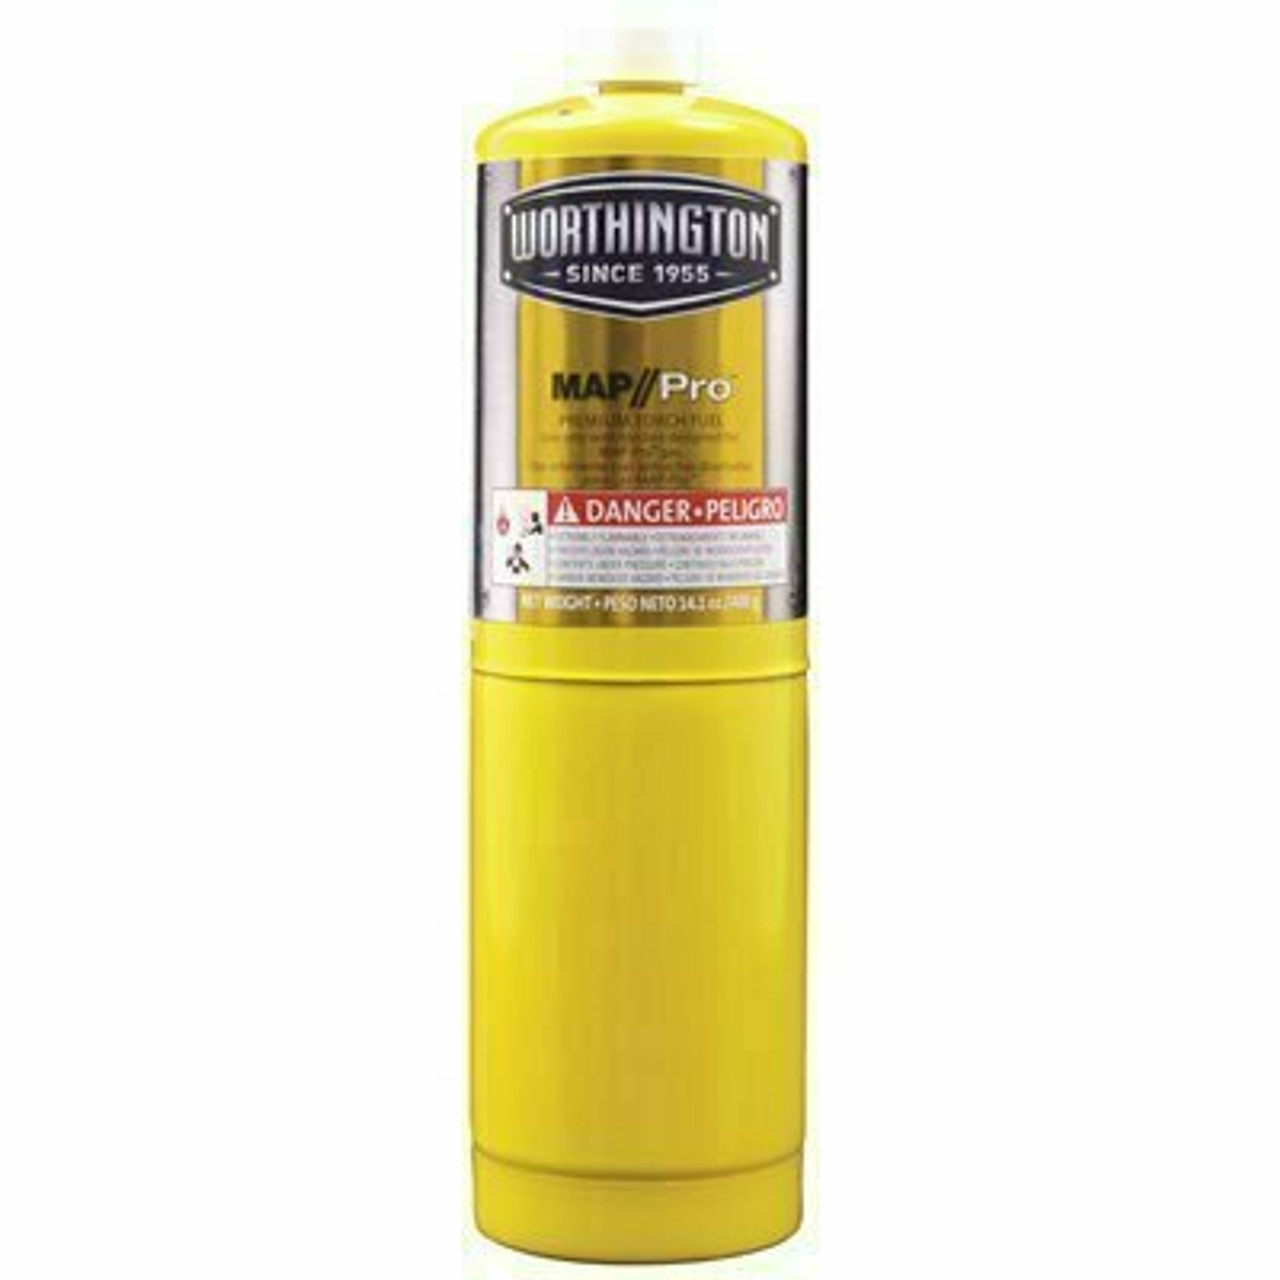 Mapp/Pro Gas Cylinder With Seam Cover Plates, 16 Oz.